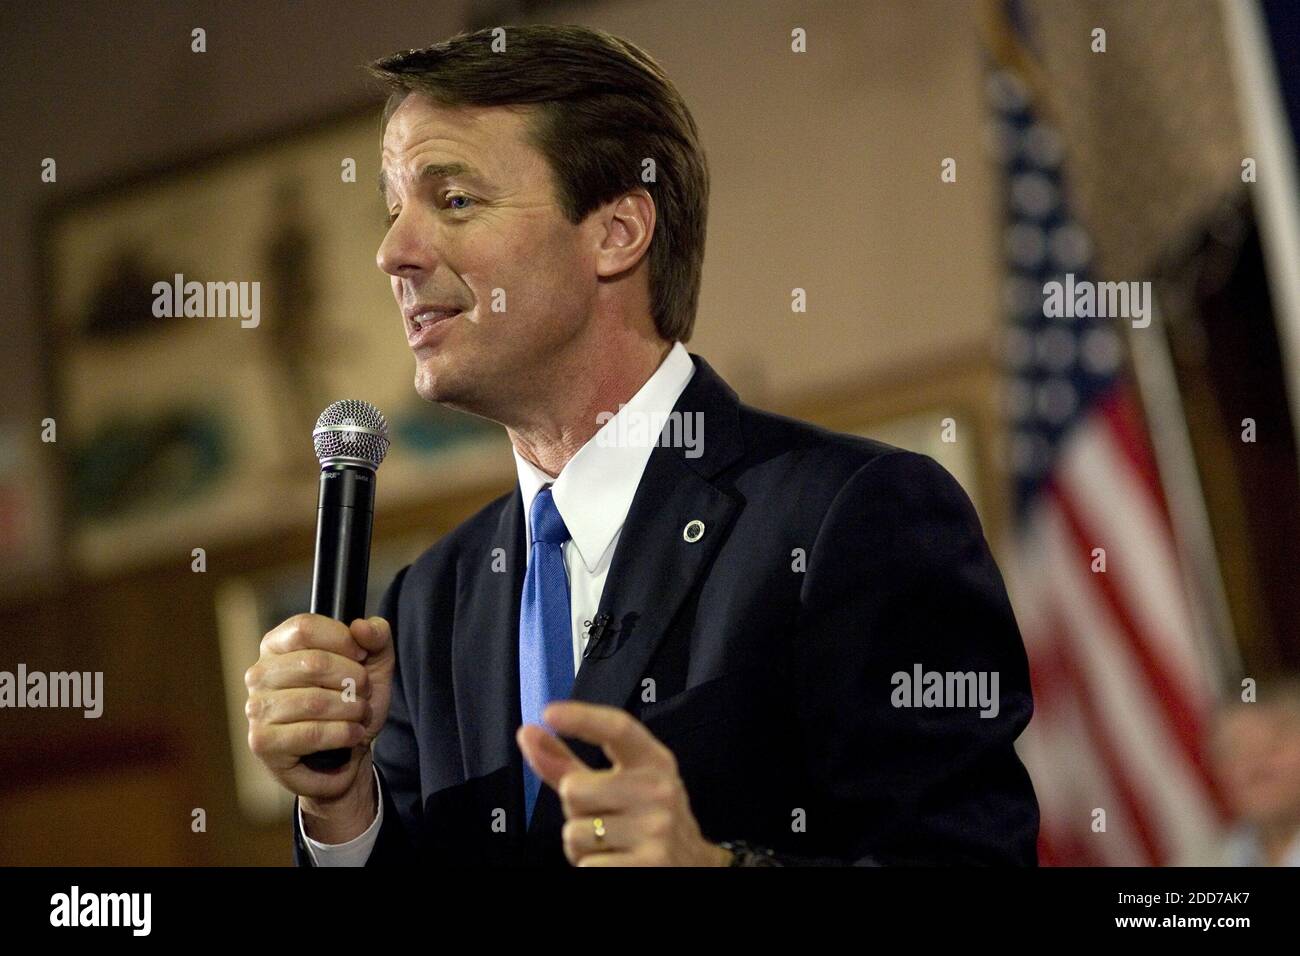 NO FILM, NO VIDEO, NO TV, NO DOCUMENTARY - Democratic presidential hopeful, former Senator John Edwards delivers his stump speech during a campaign stop at the VFW Hall in Algona, Iowa, Monday, December 31, 2007. Photo by Robert Willett/Raleigh News & Observer/MCT/ABACAPRESS.COM Stock Photo